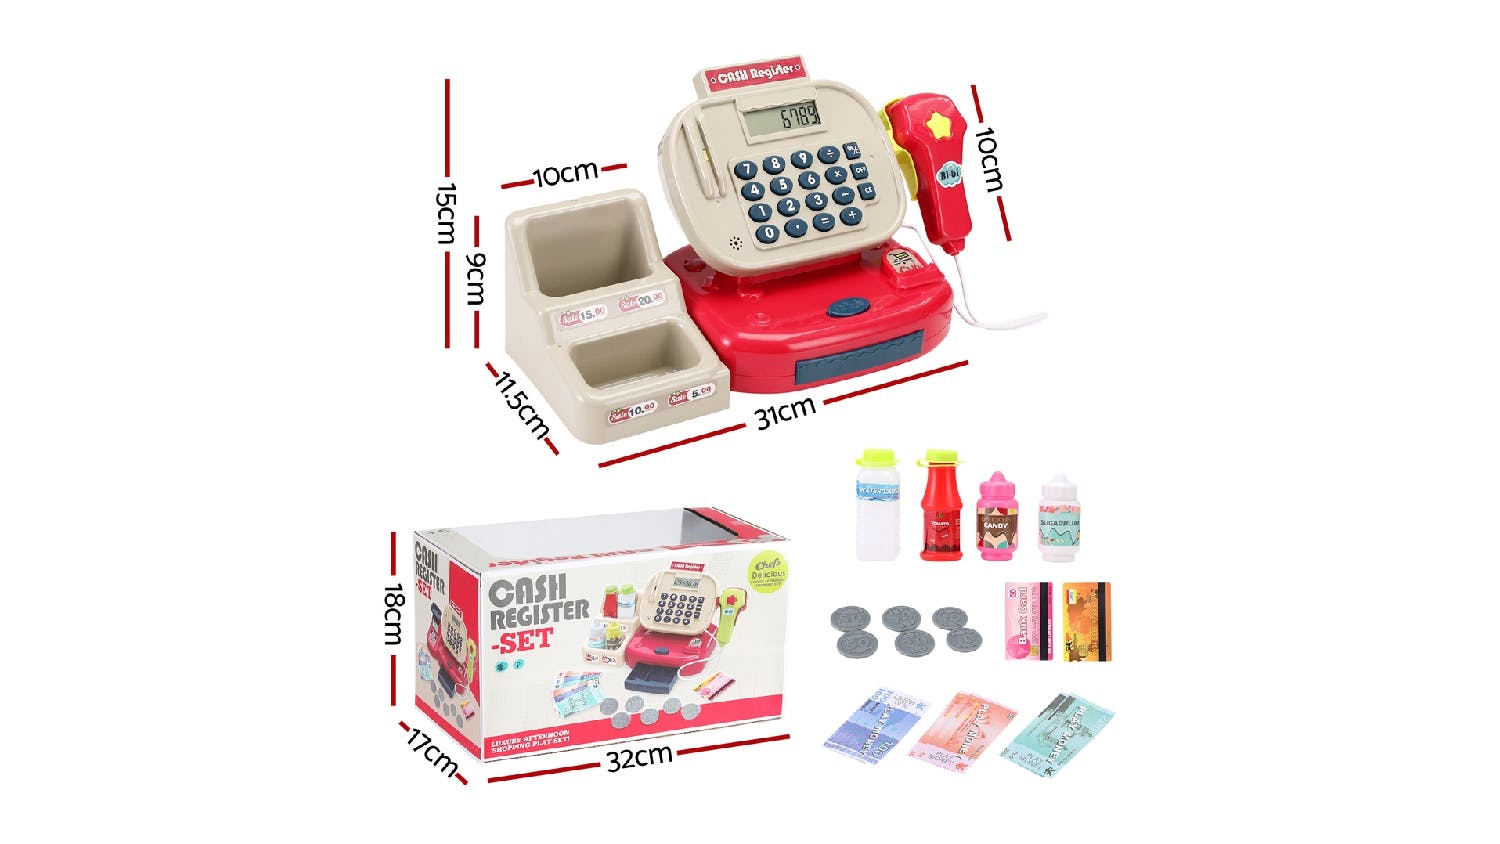 Keezi Kids Electronic Cash Register Play Set with Play Money, Produce, Scanner